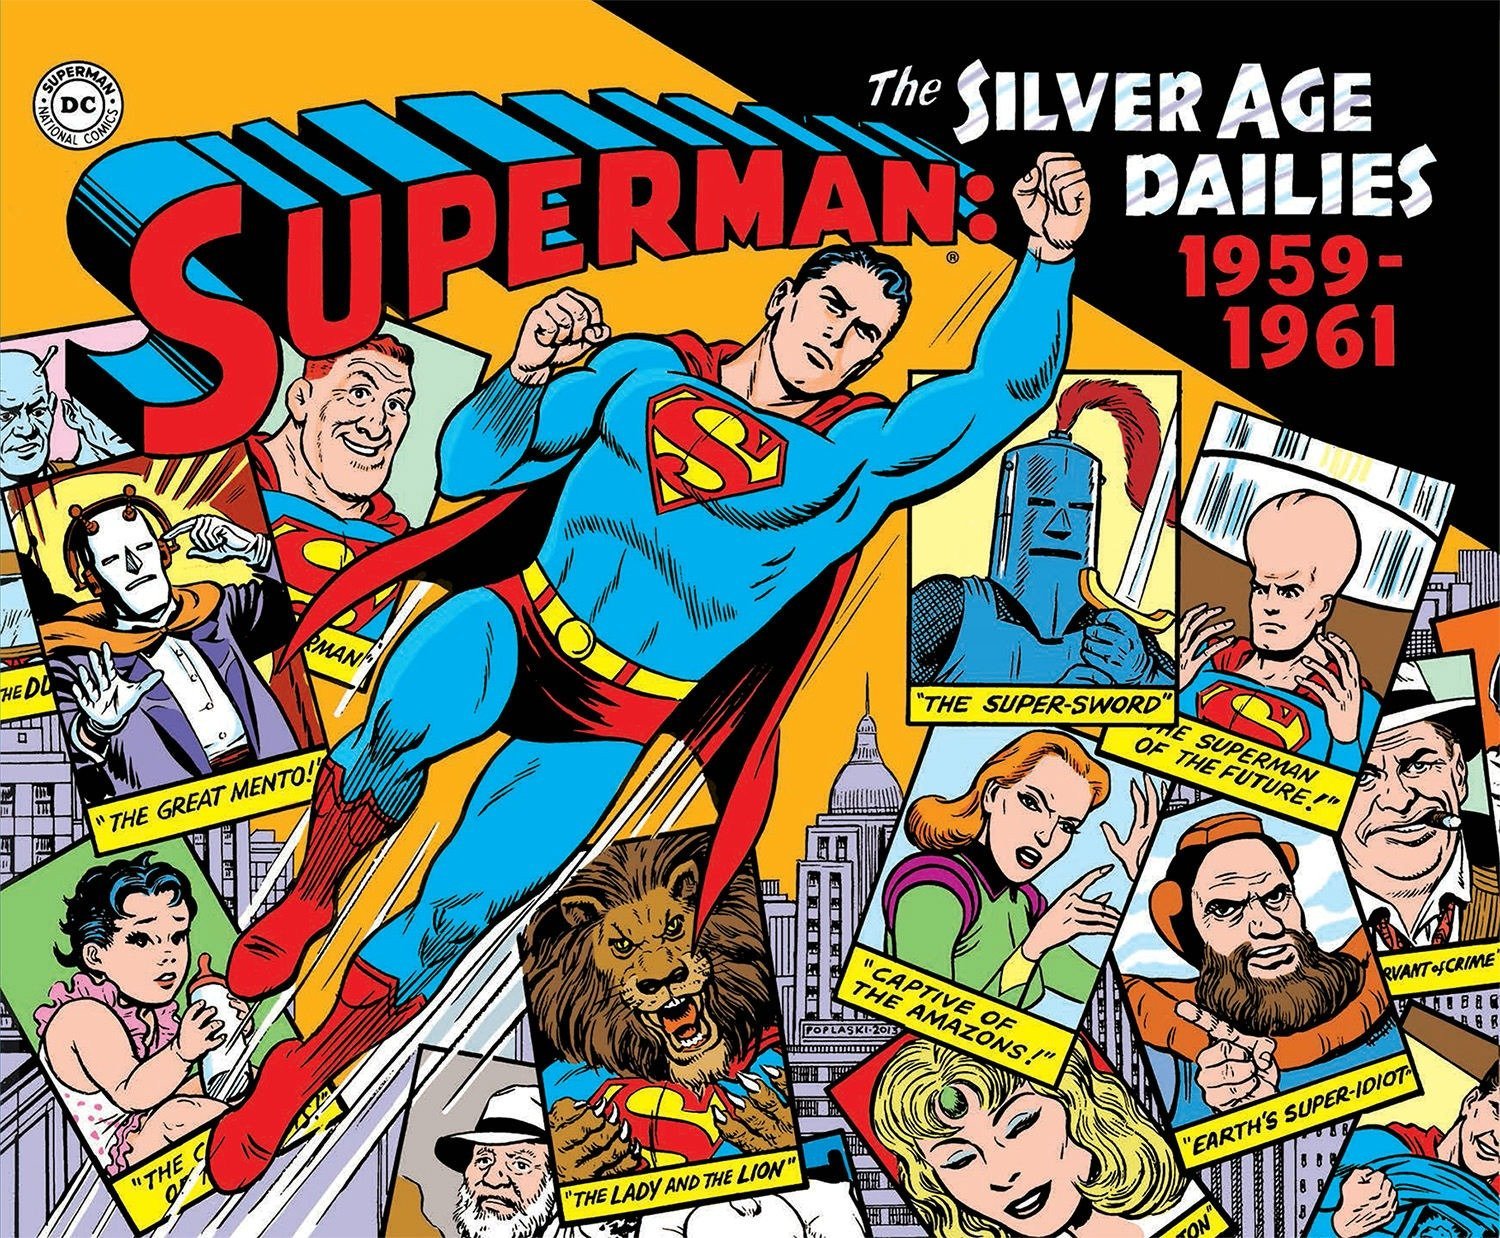 Superman: The Silver Age Newspaper Dailies Volume 1: 1959-1961 (Superman Silver Age Dailies)